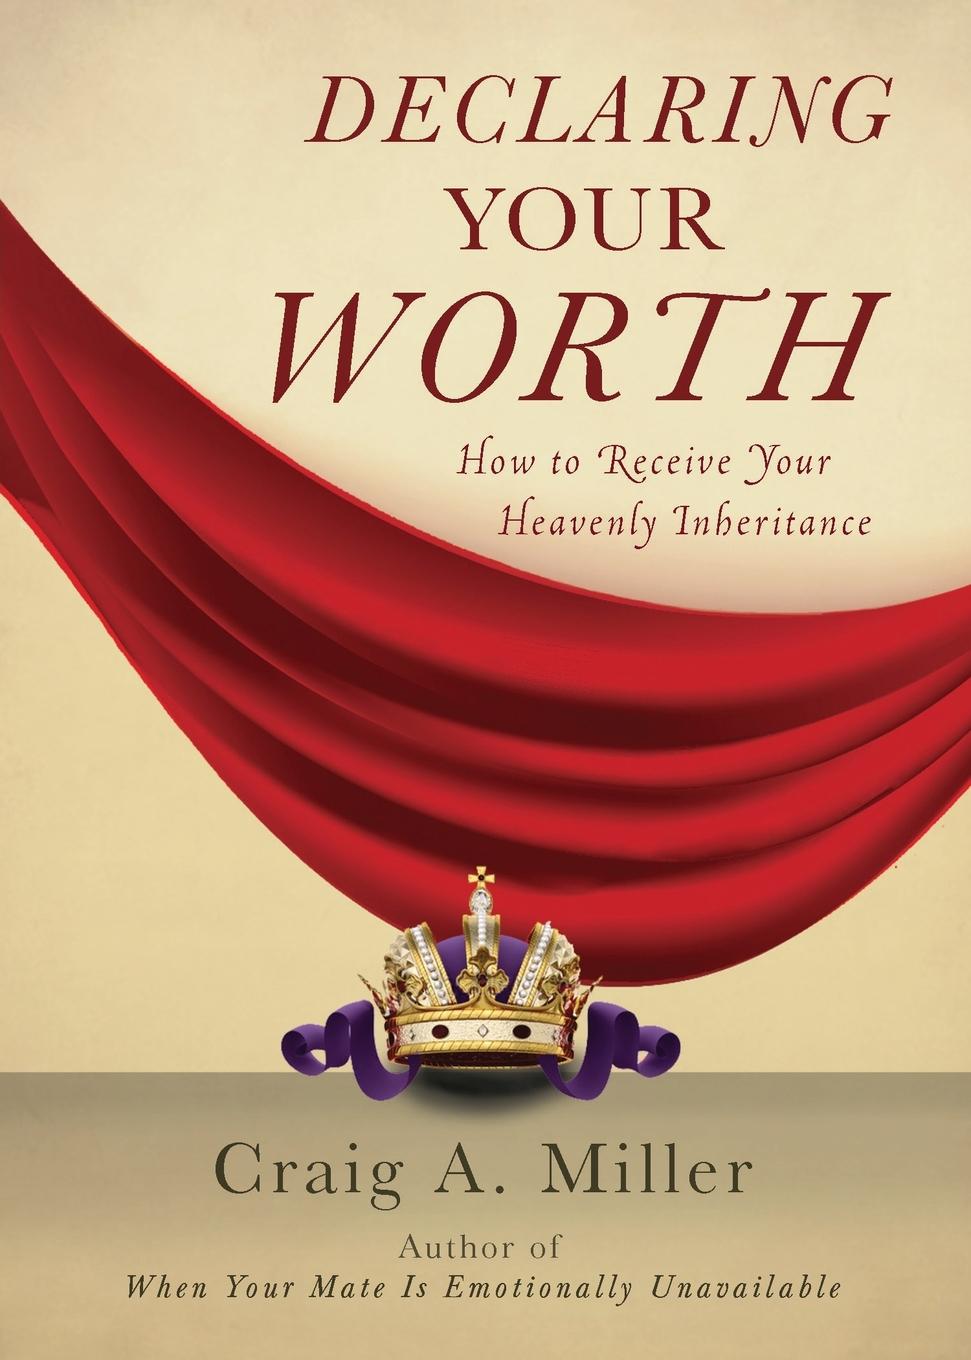 Craig Miller Declaring Your Worth. How to Receive Your Heavenly Inheritance